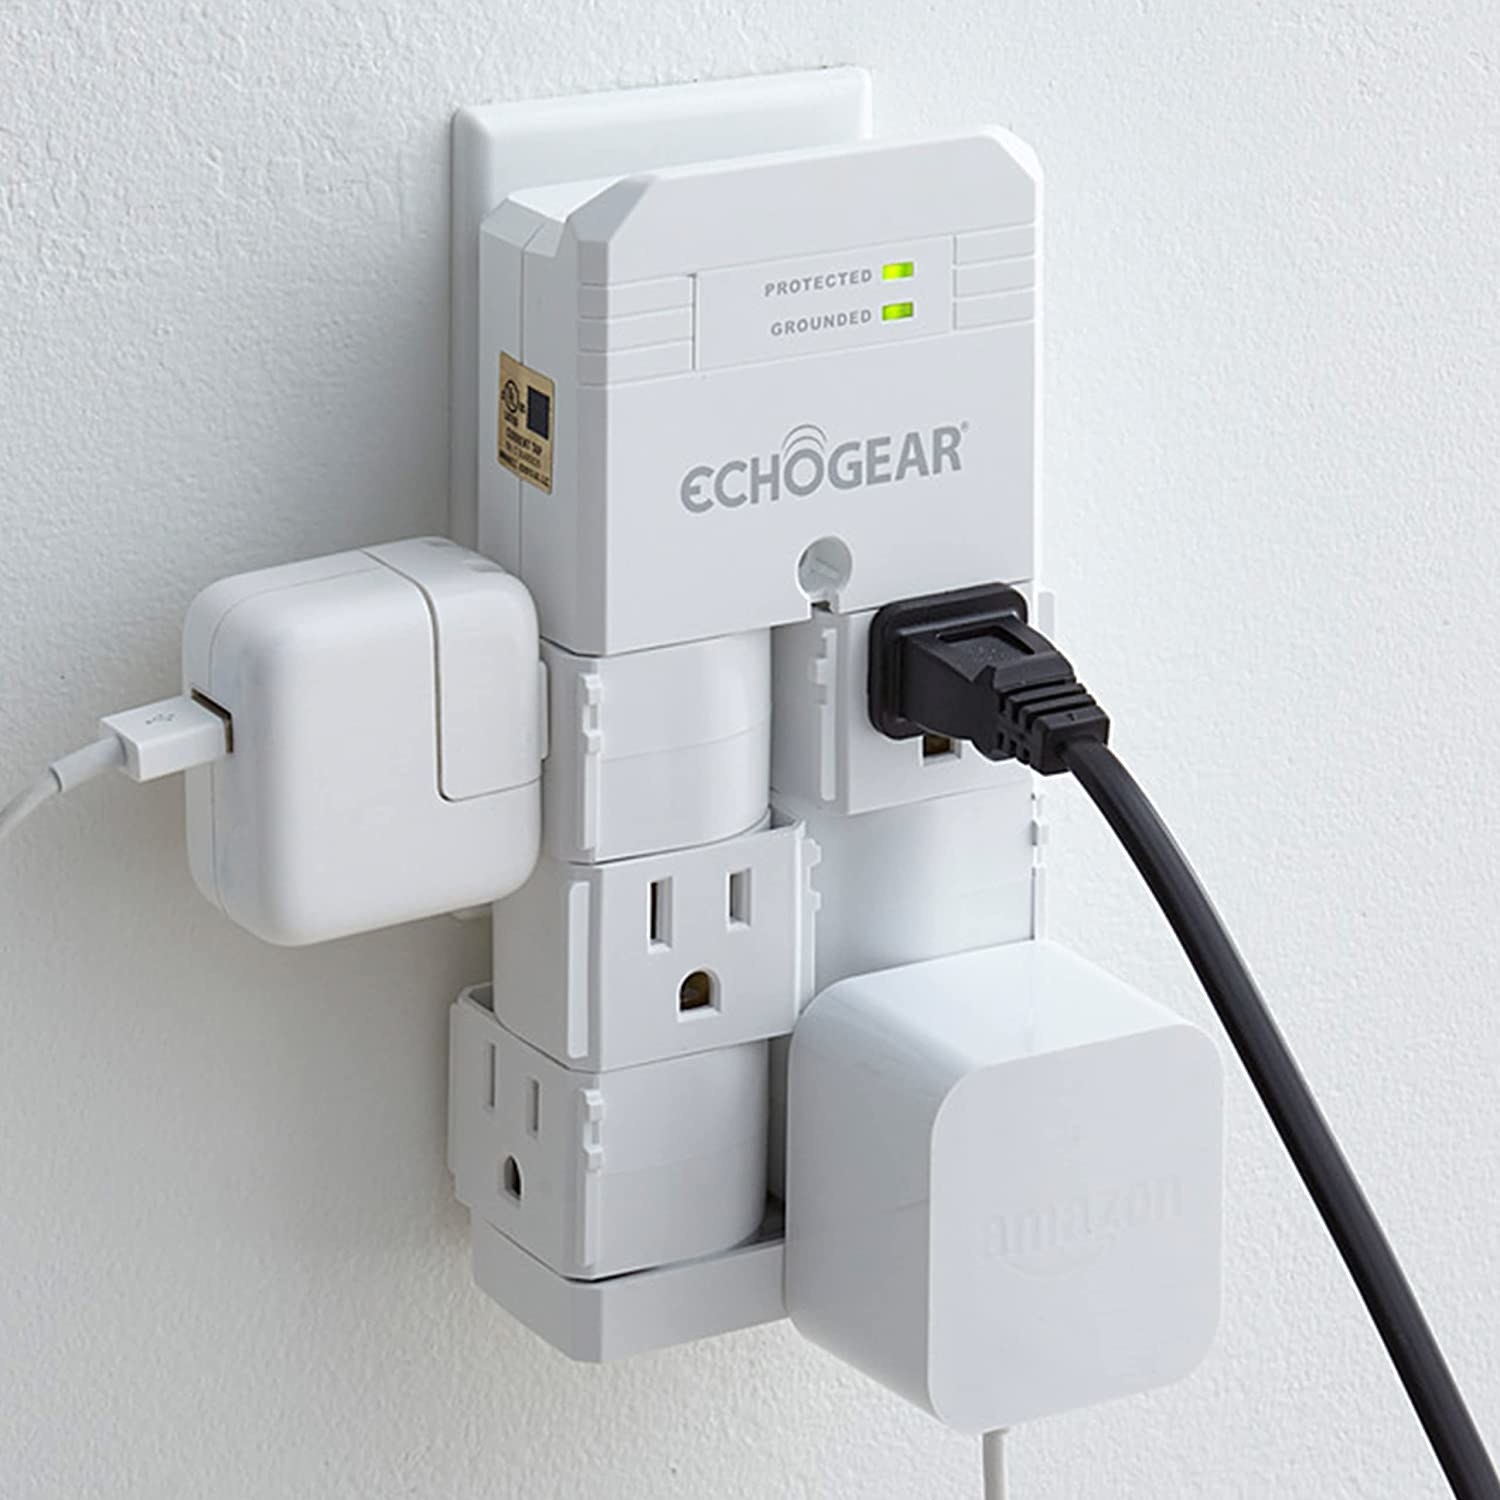 The surge protector with three cords plugged in